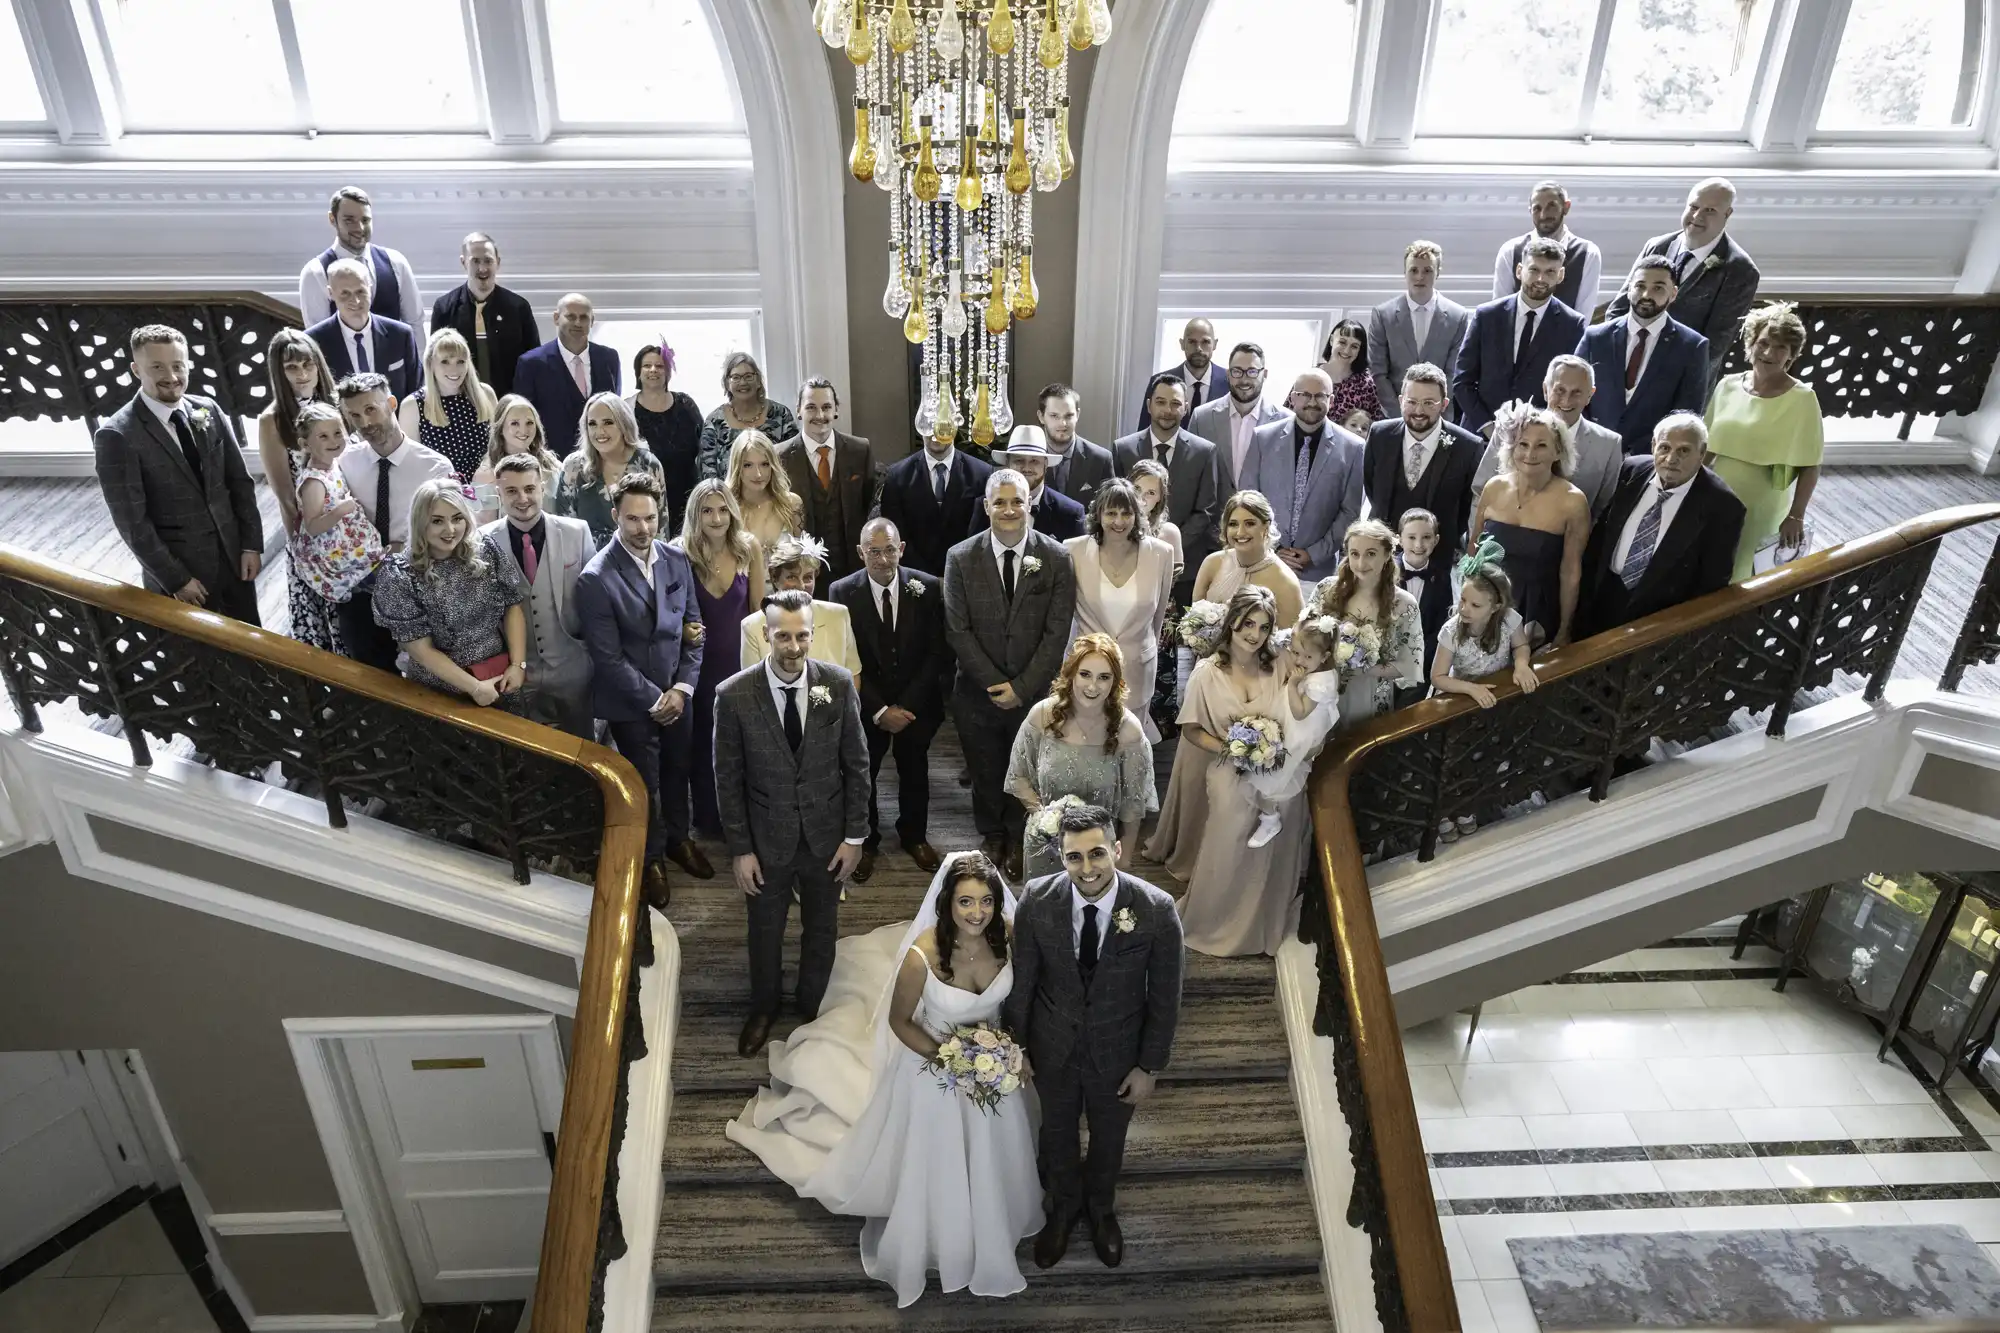 A bride in a long white dress and a groom in a suit on the grand staircase, smiling, in an elegant lobby surrounded by family and friends during the group photo of everyone